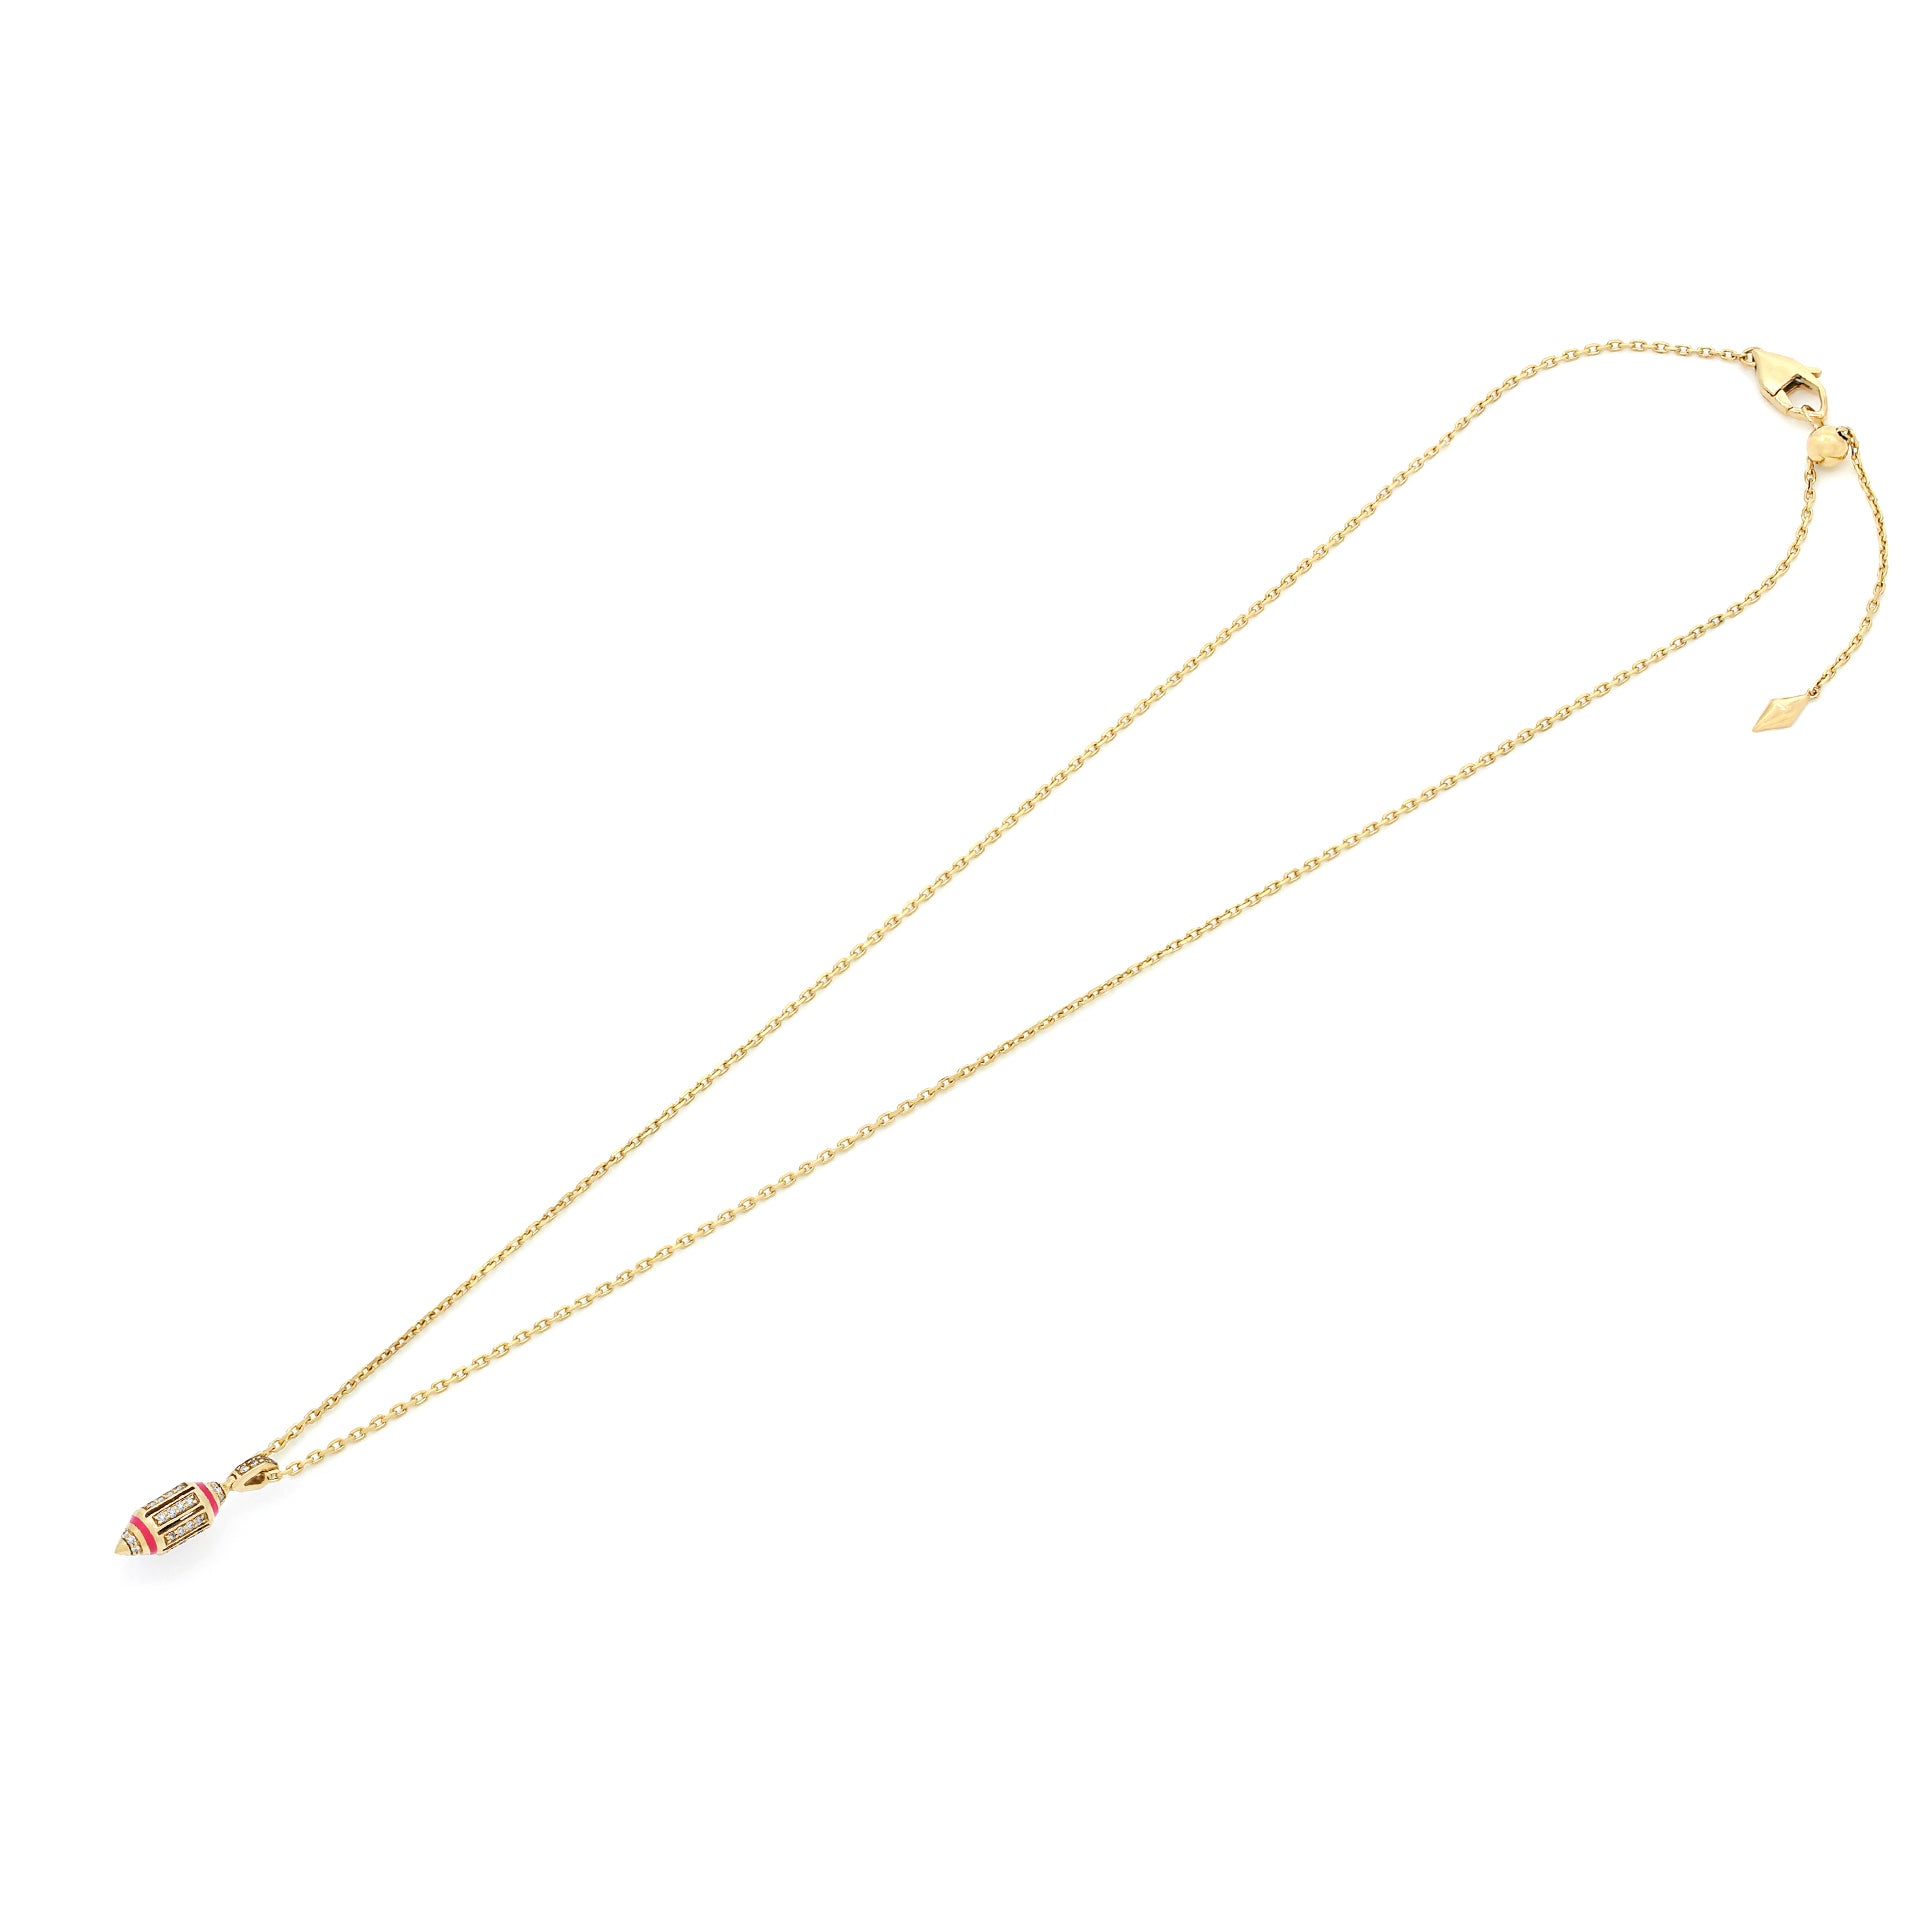 Summer Hues Necklace in Pink